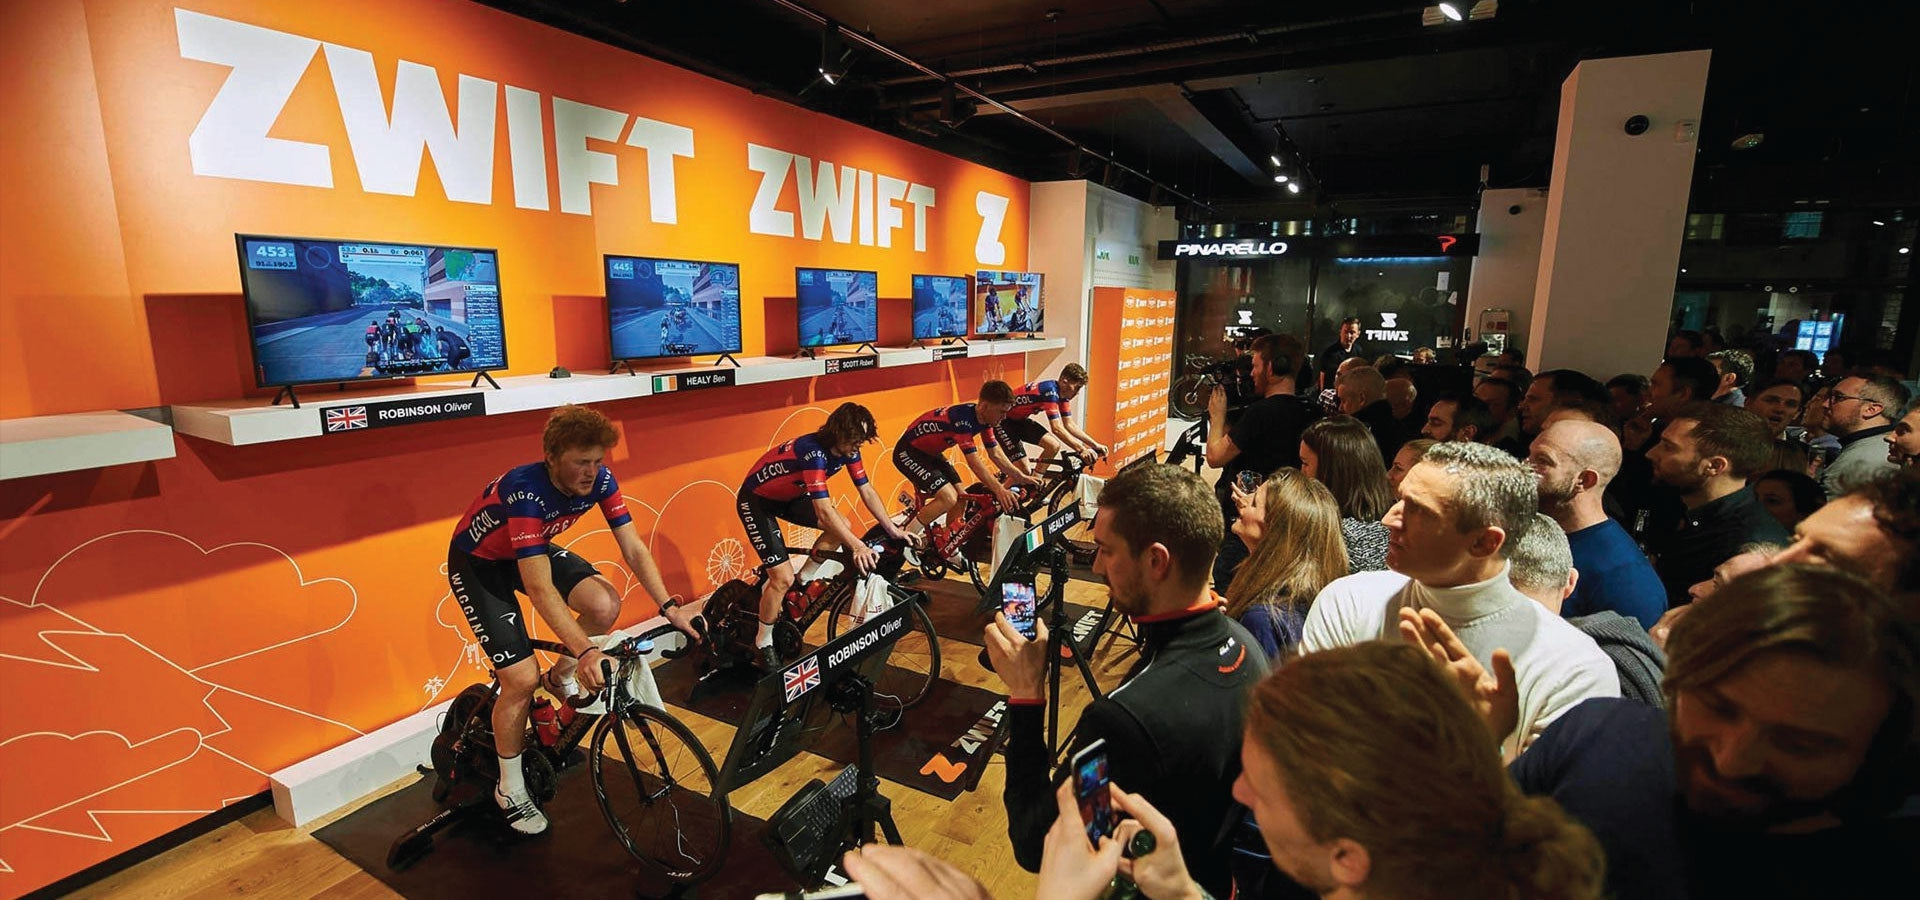 The 3 best indoor cycling apps